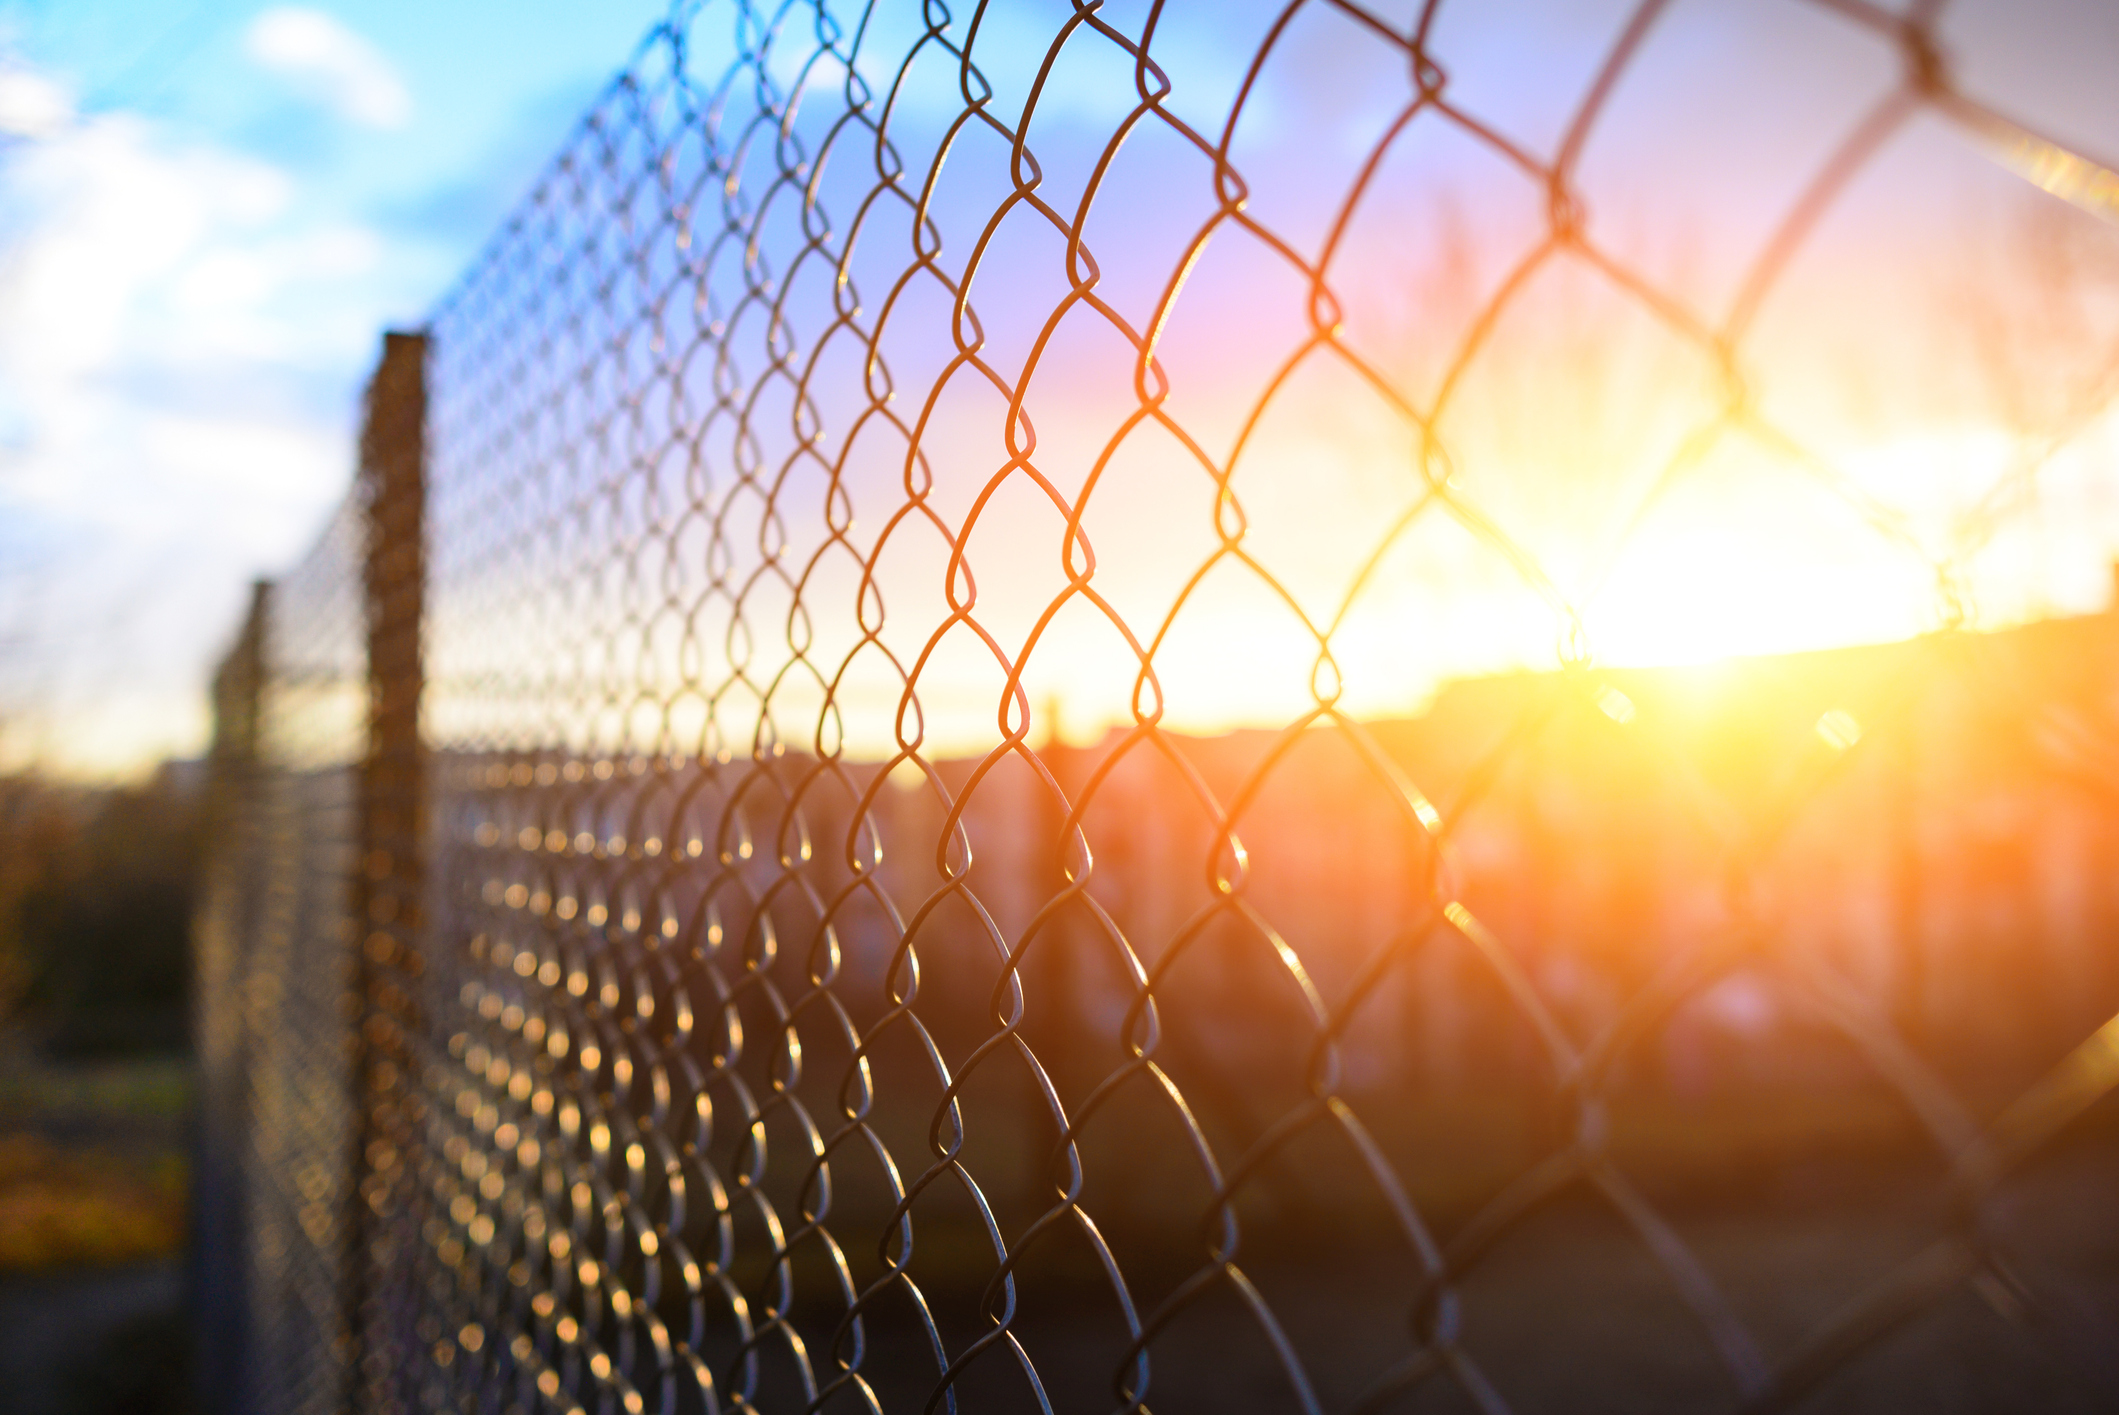 a chain link fence with a pittsburgh sun in the background